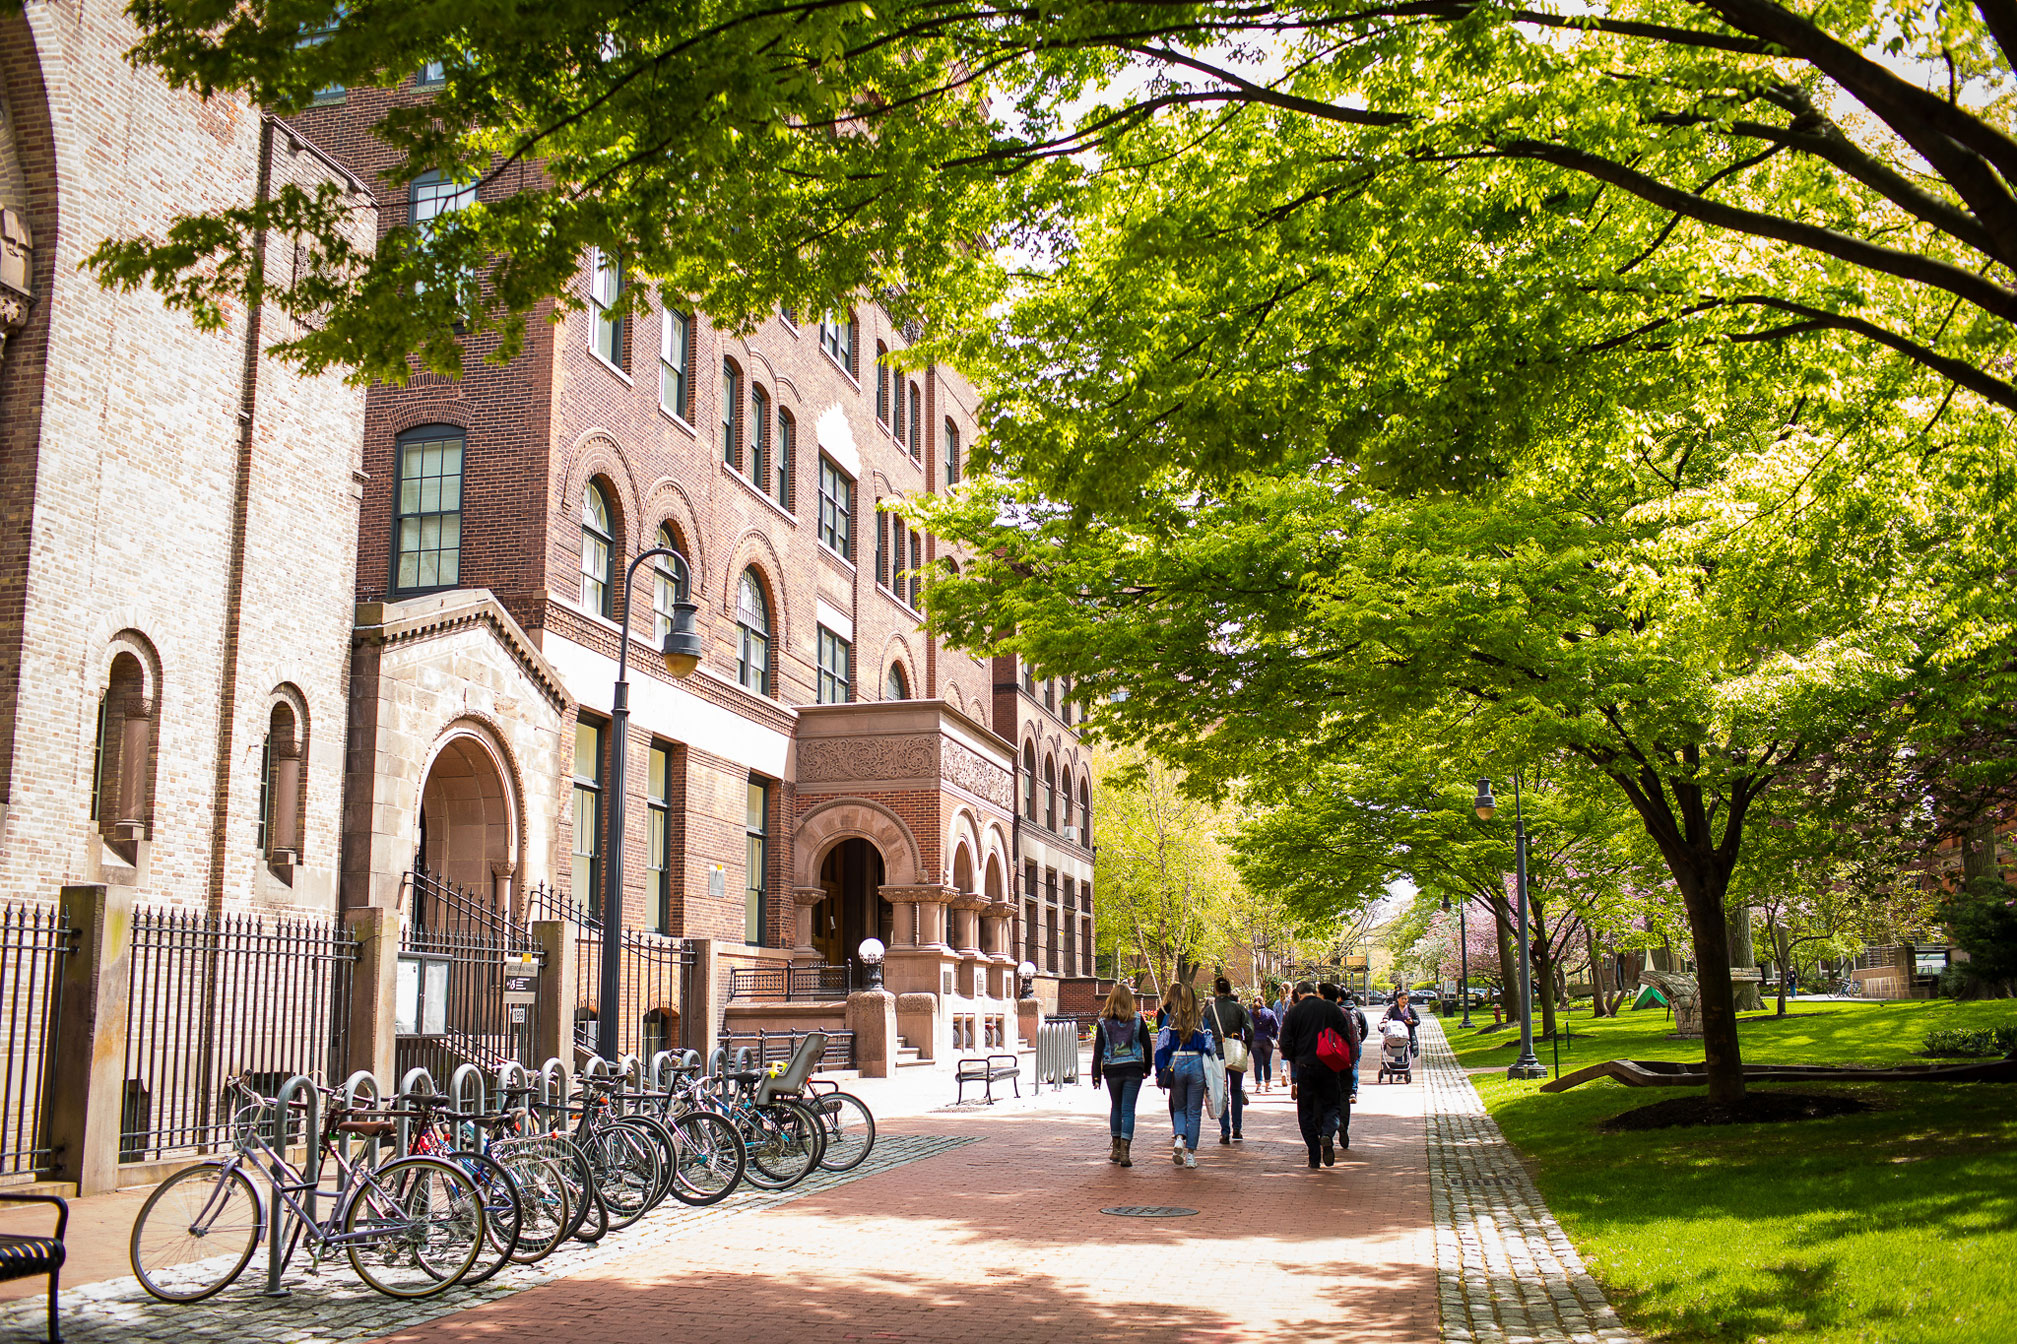 A group of students walks on a brick path through campus. Main Hall is to their left and a bike rack is full of bicycles. Large trees to the right of the walk provide shade.